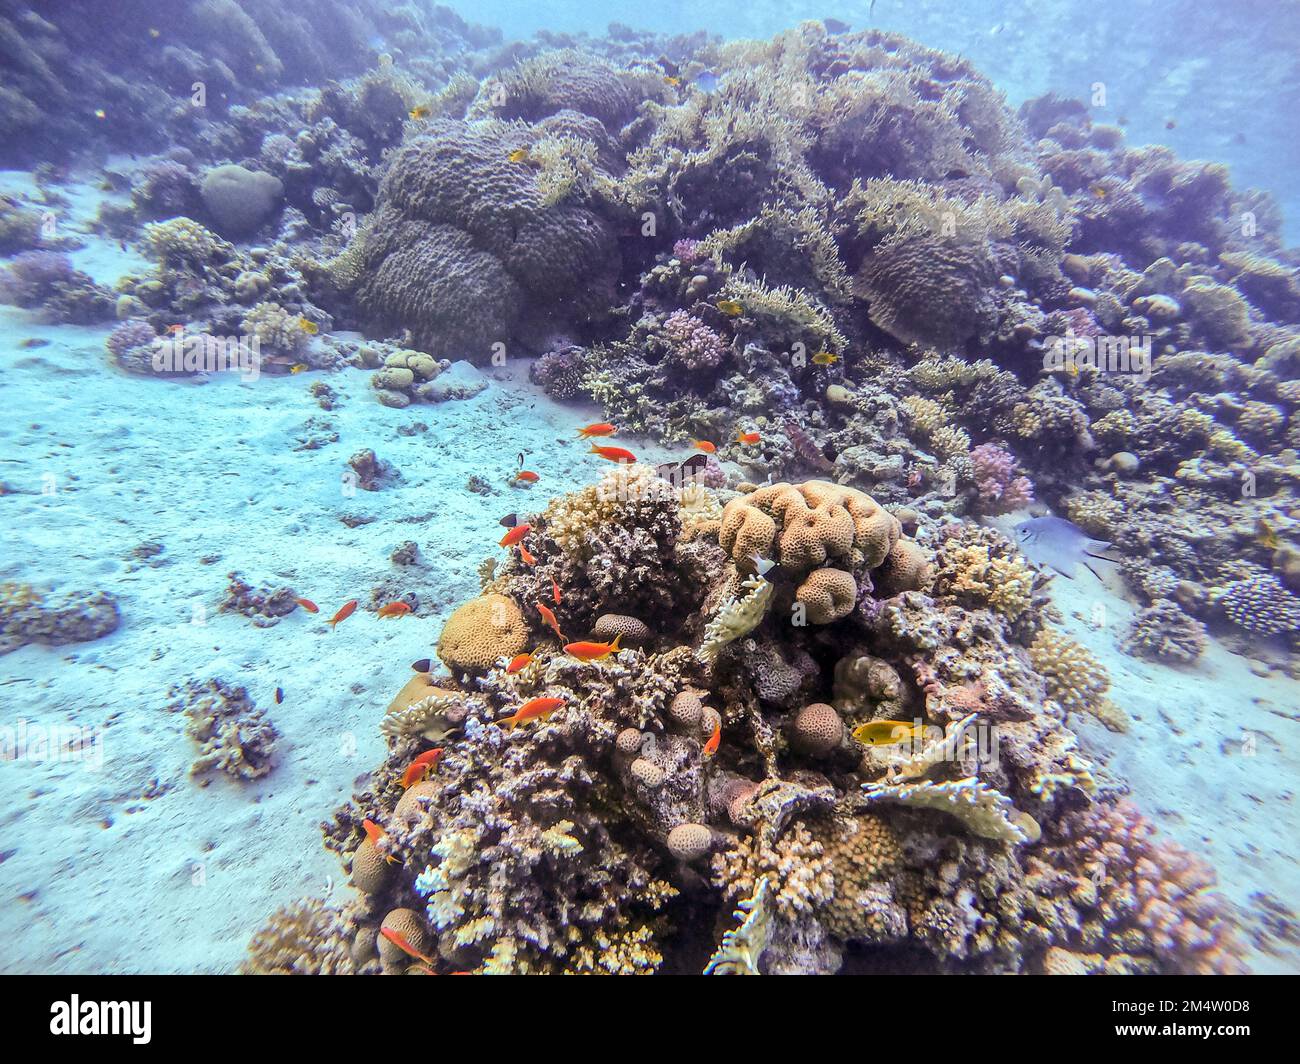 Underwater panoramic view of coral reef with shoal of Lyretail anthias (Pseudanthias squamipinnis) and other kinds of tropical fish, seaweeds and cora Stock Photo